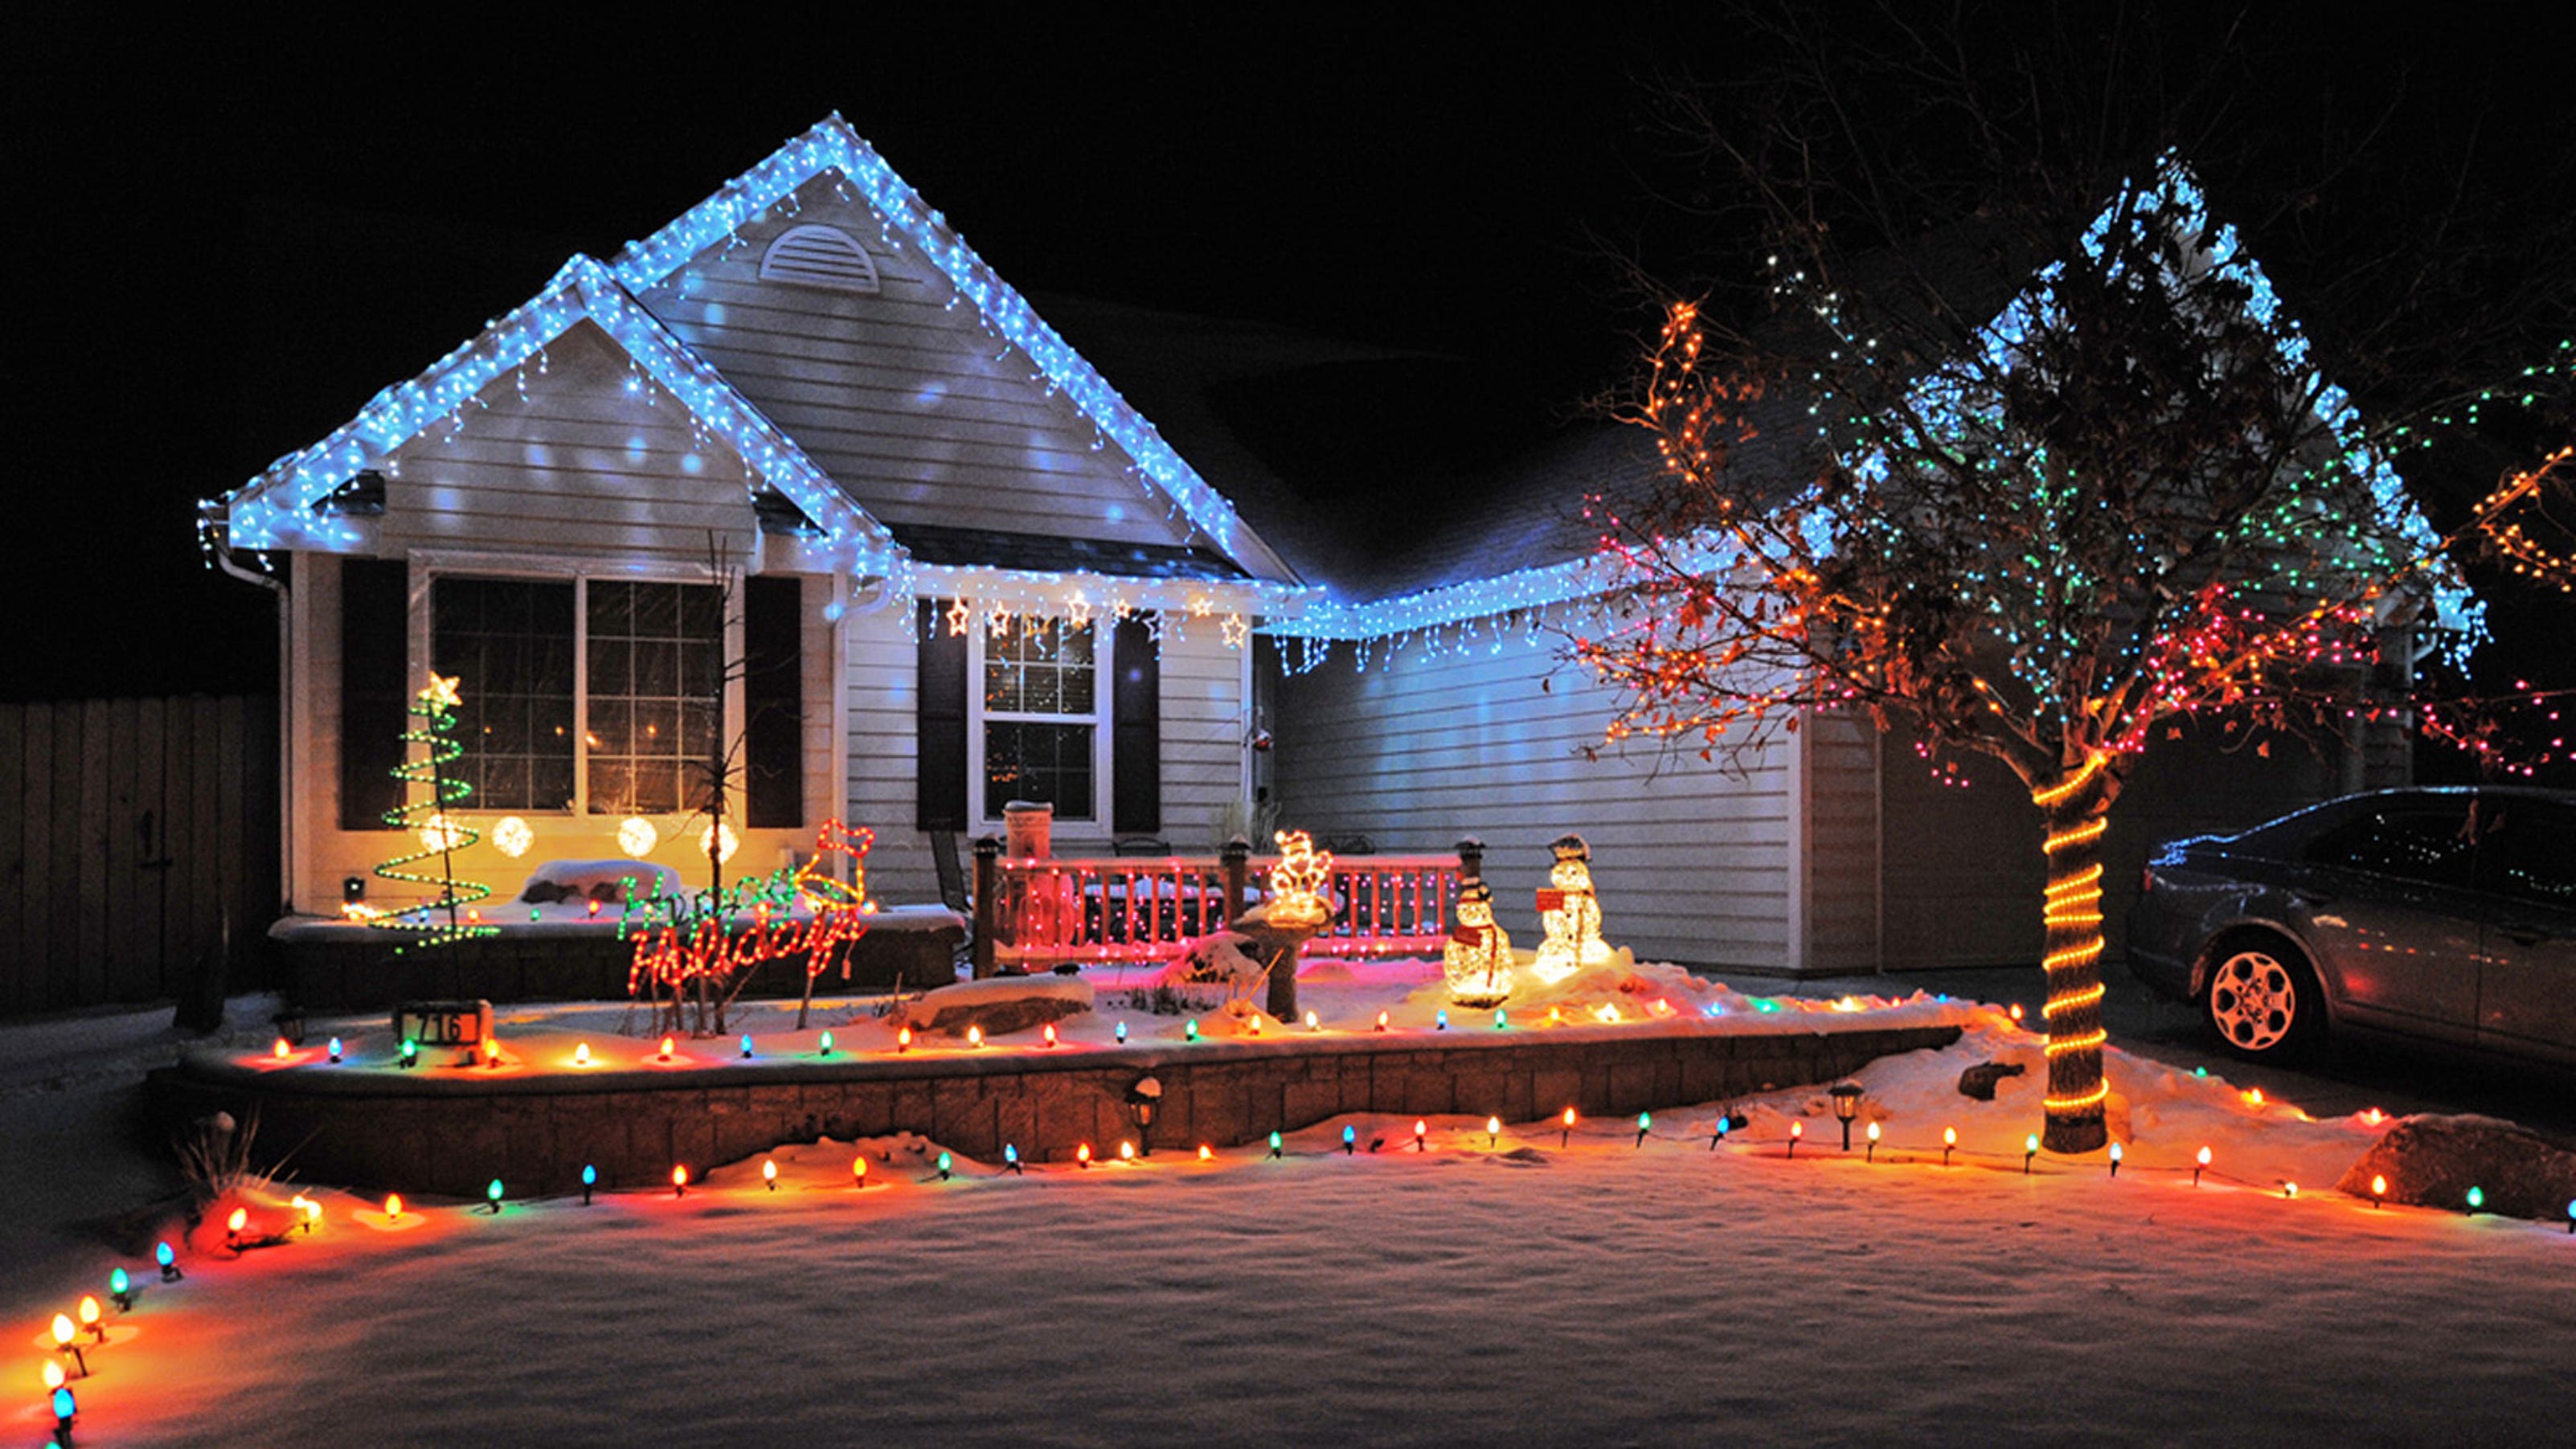 Where to get your Christmas lights fix in Fort Collins